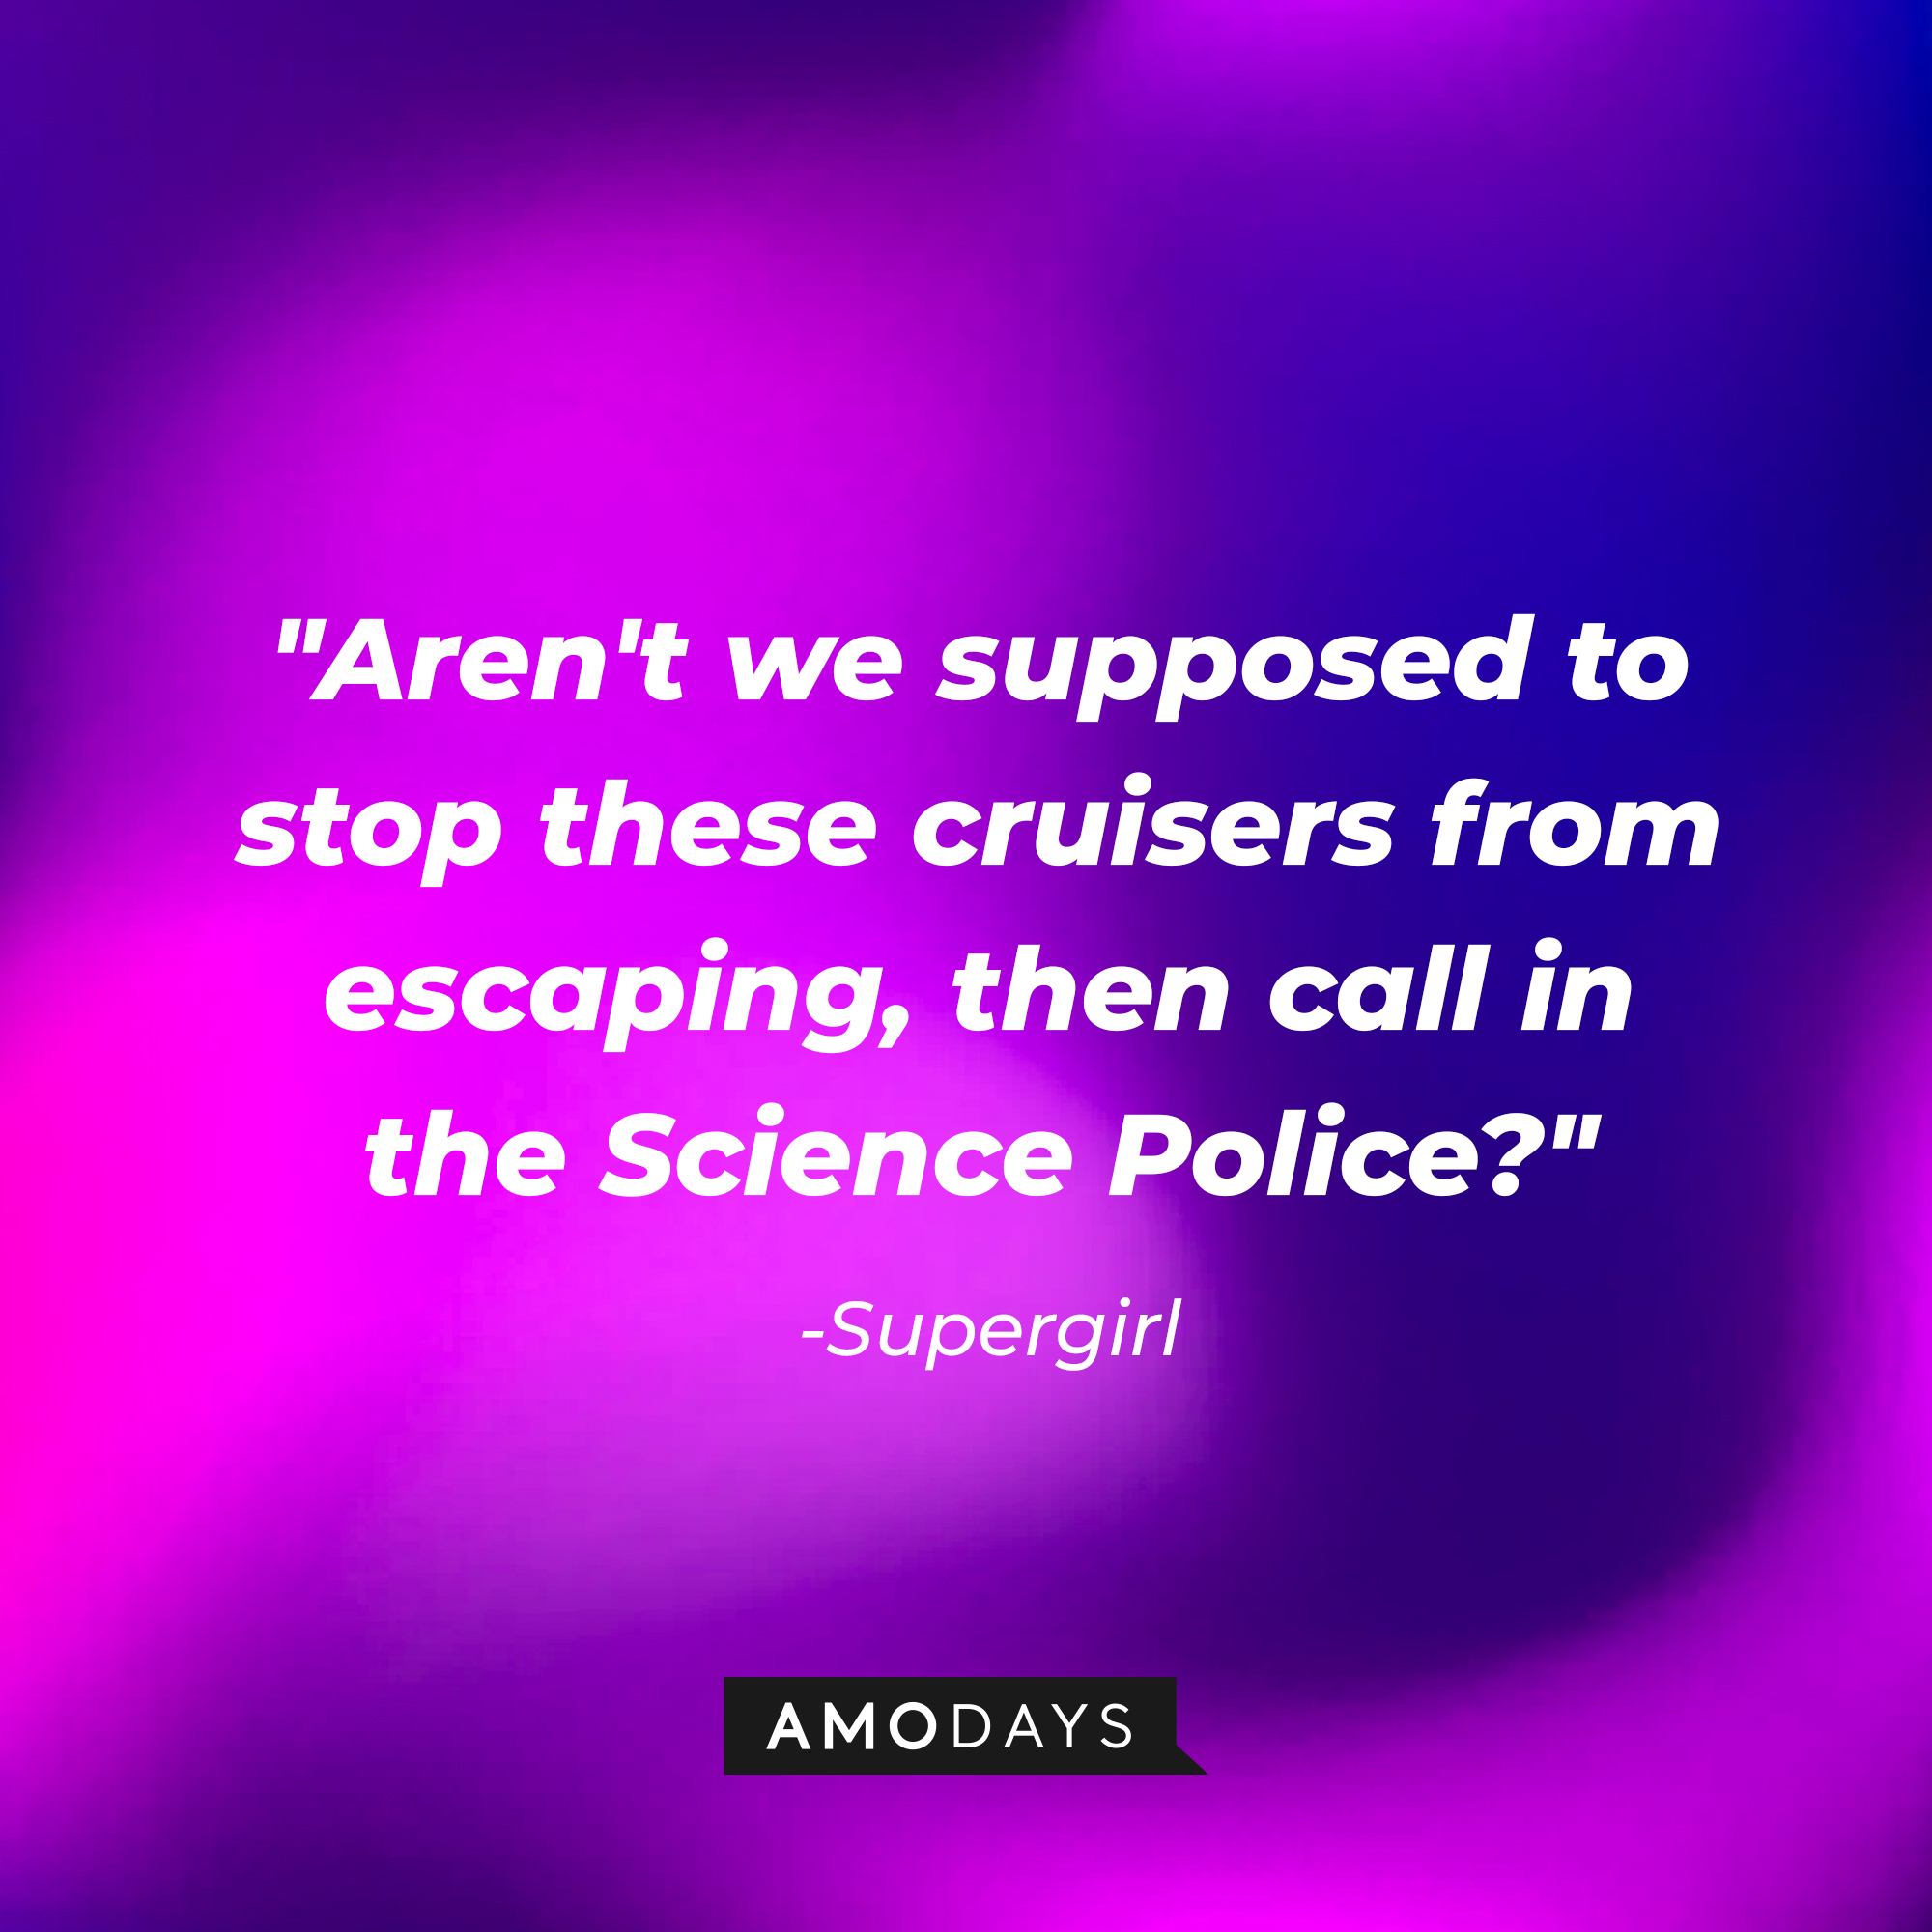 Supergirl's quote: "Aren't we supposed to stop these cruisers from escaping, then call in the Science Police?" | Source: AmoDays